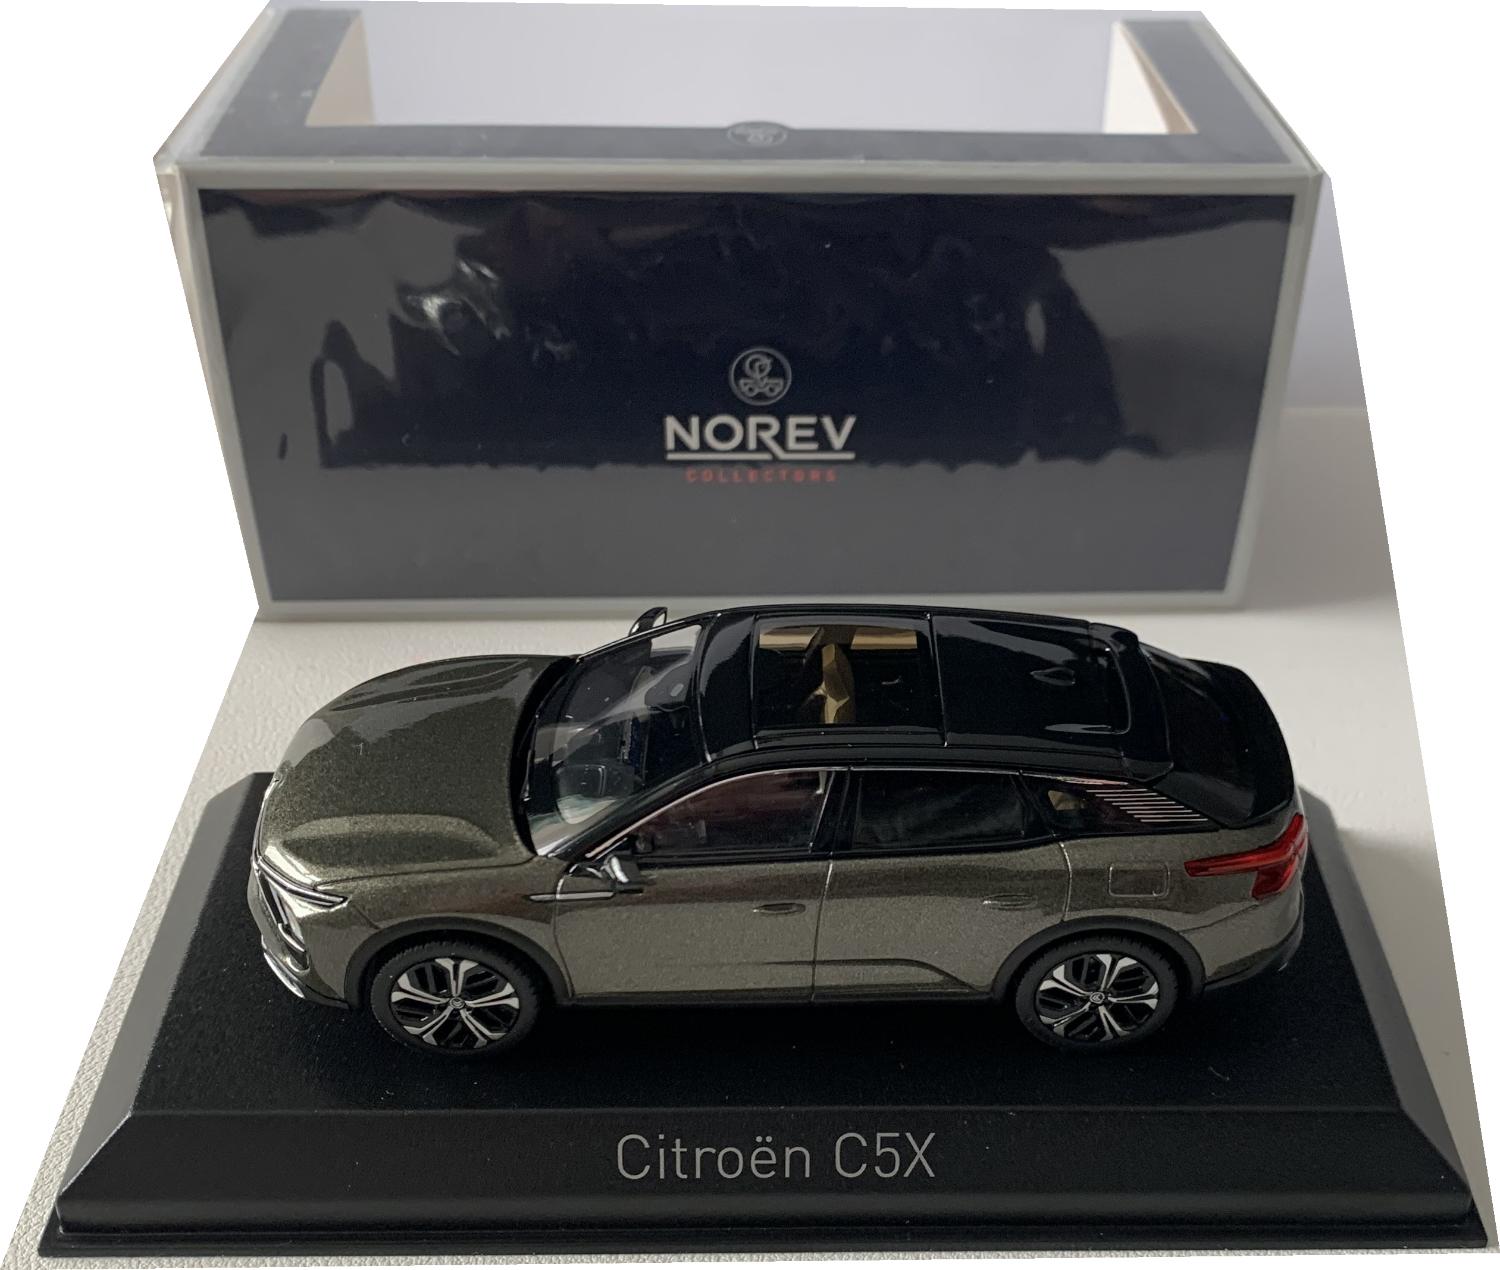 An excellent reproduction of the Citroen C5X with detail throughout, all authentically recreated.  Model is mounted on a removable plinth with a removable hard plastic cover